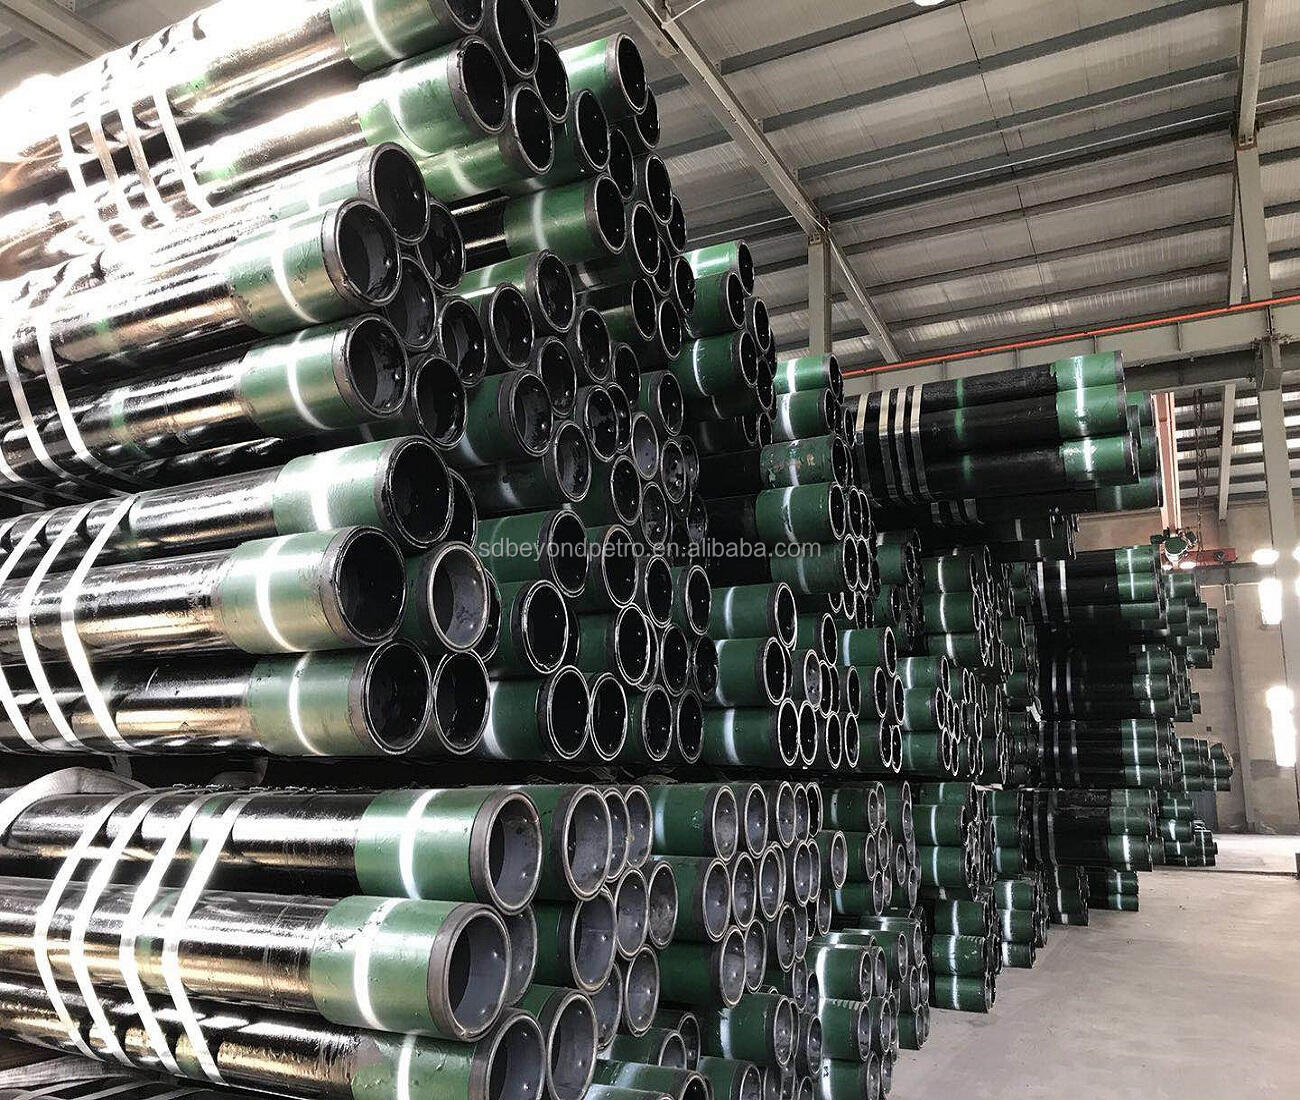 Api Seamless Steel Casing Drill Pipe or Tubing for Oil Well Drilling in Oilfield casing steel pipe supplier